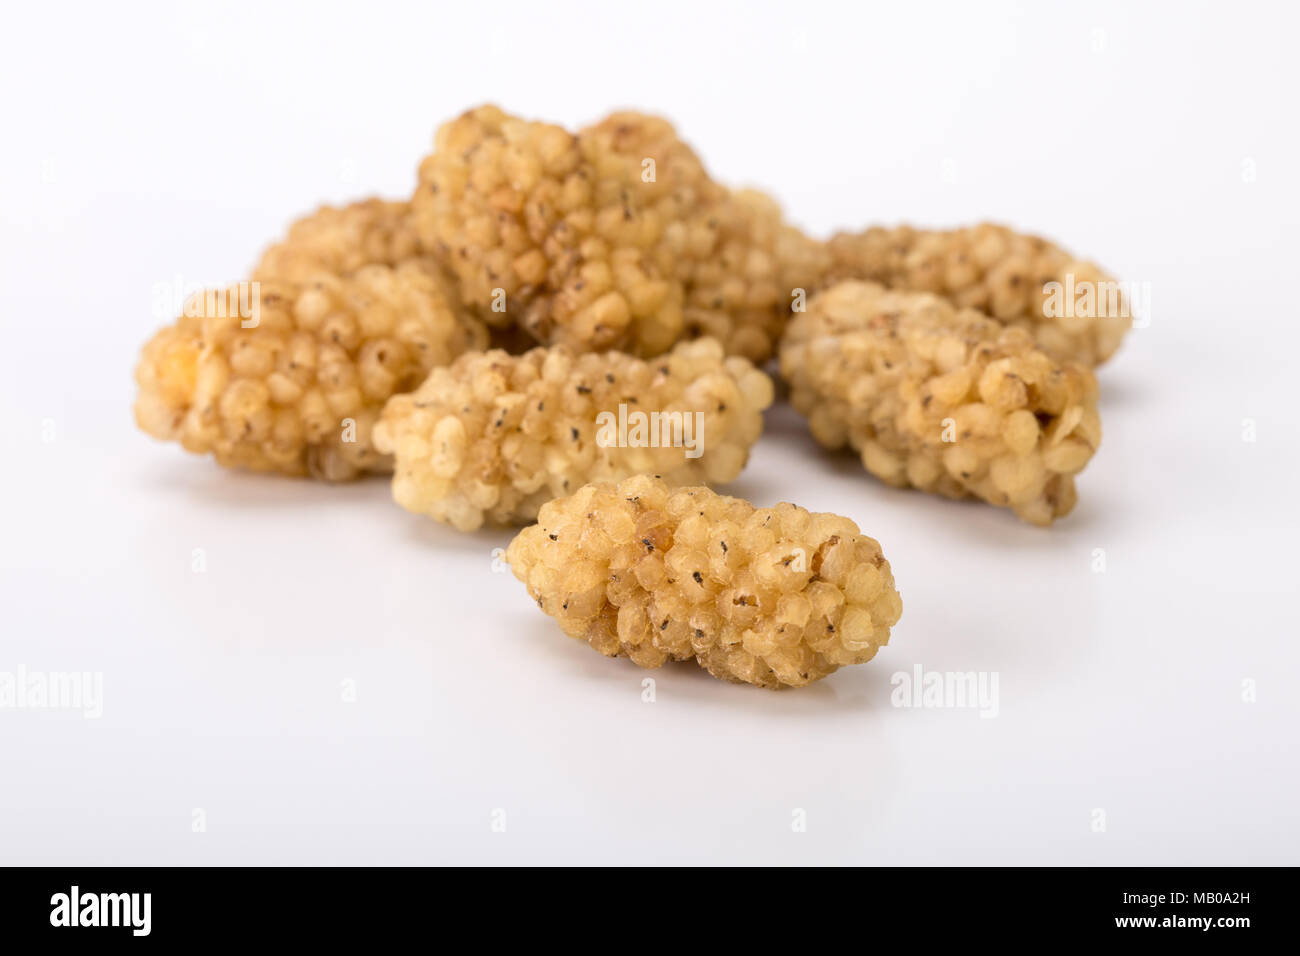 Close Up Shot Of Dried White Mulberries Fruits Isolated On White Background, A Healthy And Popular Sweet Snacks In Iran And Turkey Stock Photo